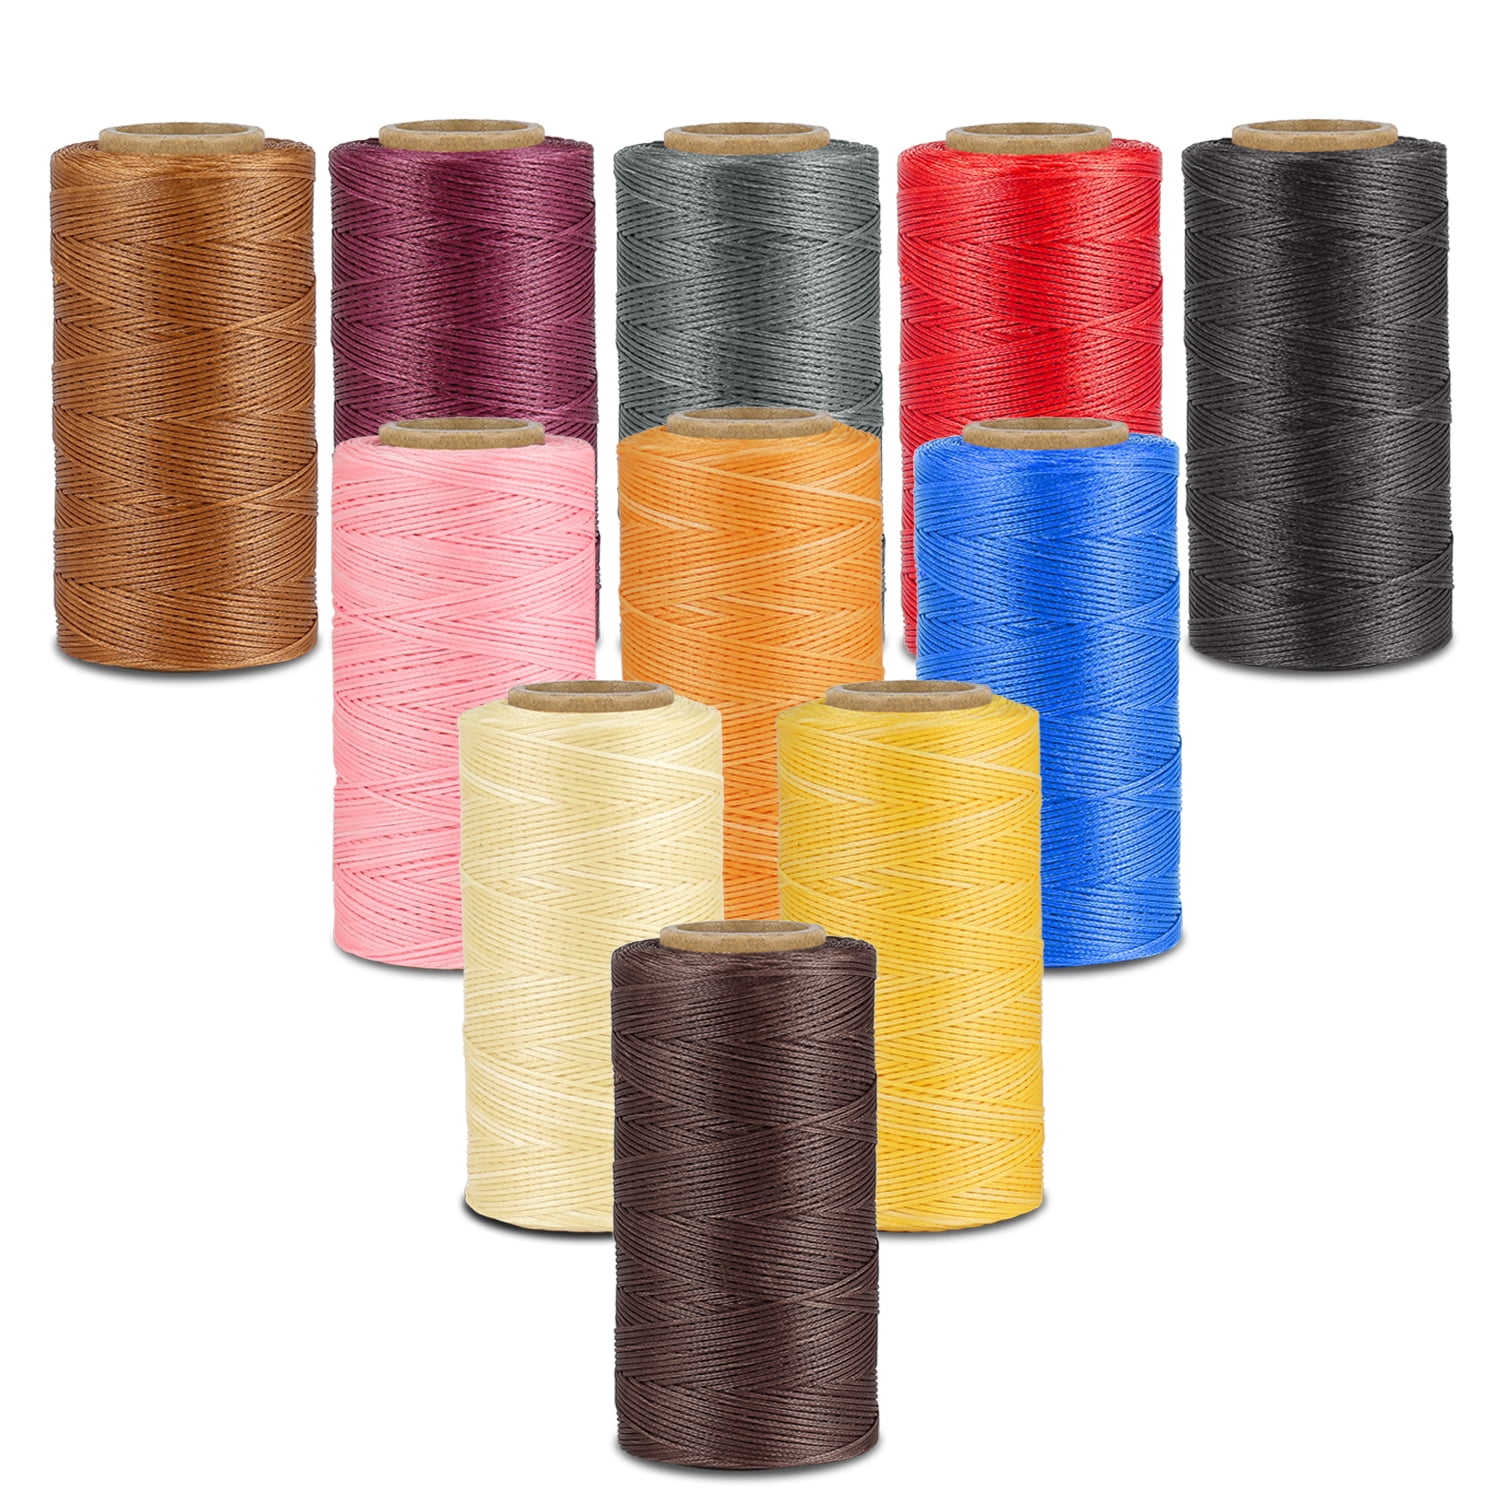 MIUSIE 1pc 50M 150D 1mm Leather Waxed Thread Cord for DIY